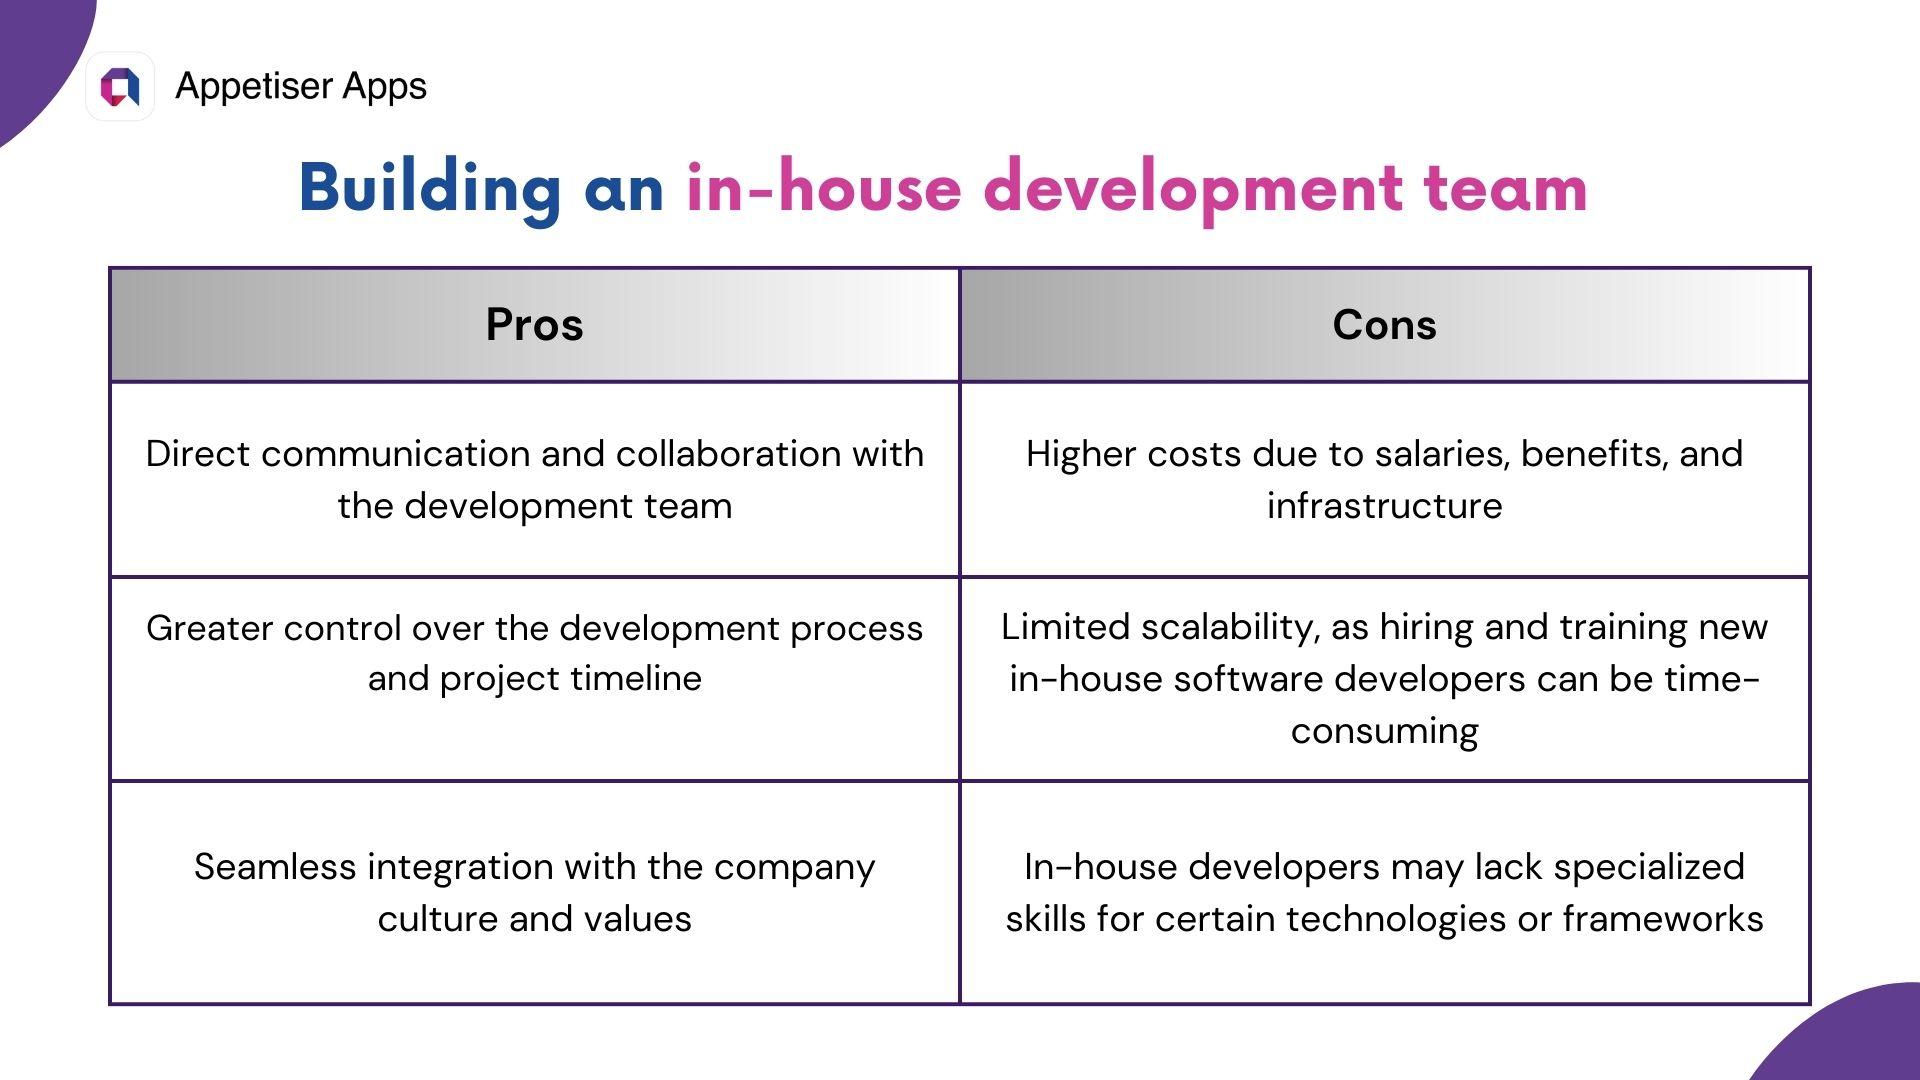 HTHAFED: pros and cons of building an in-house dev team